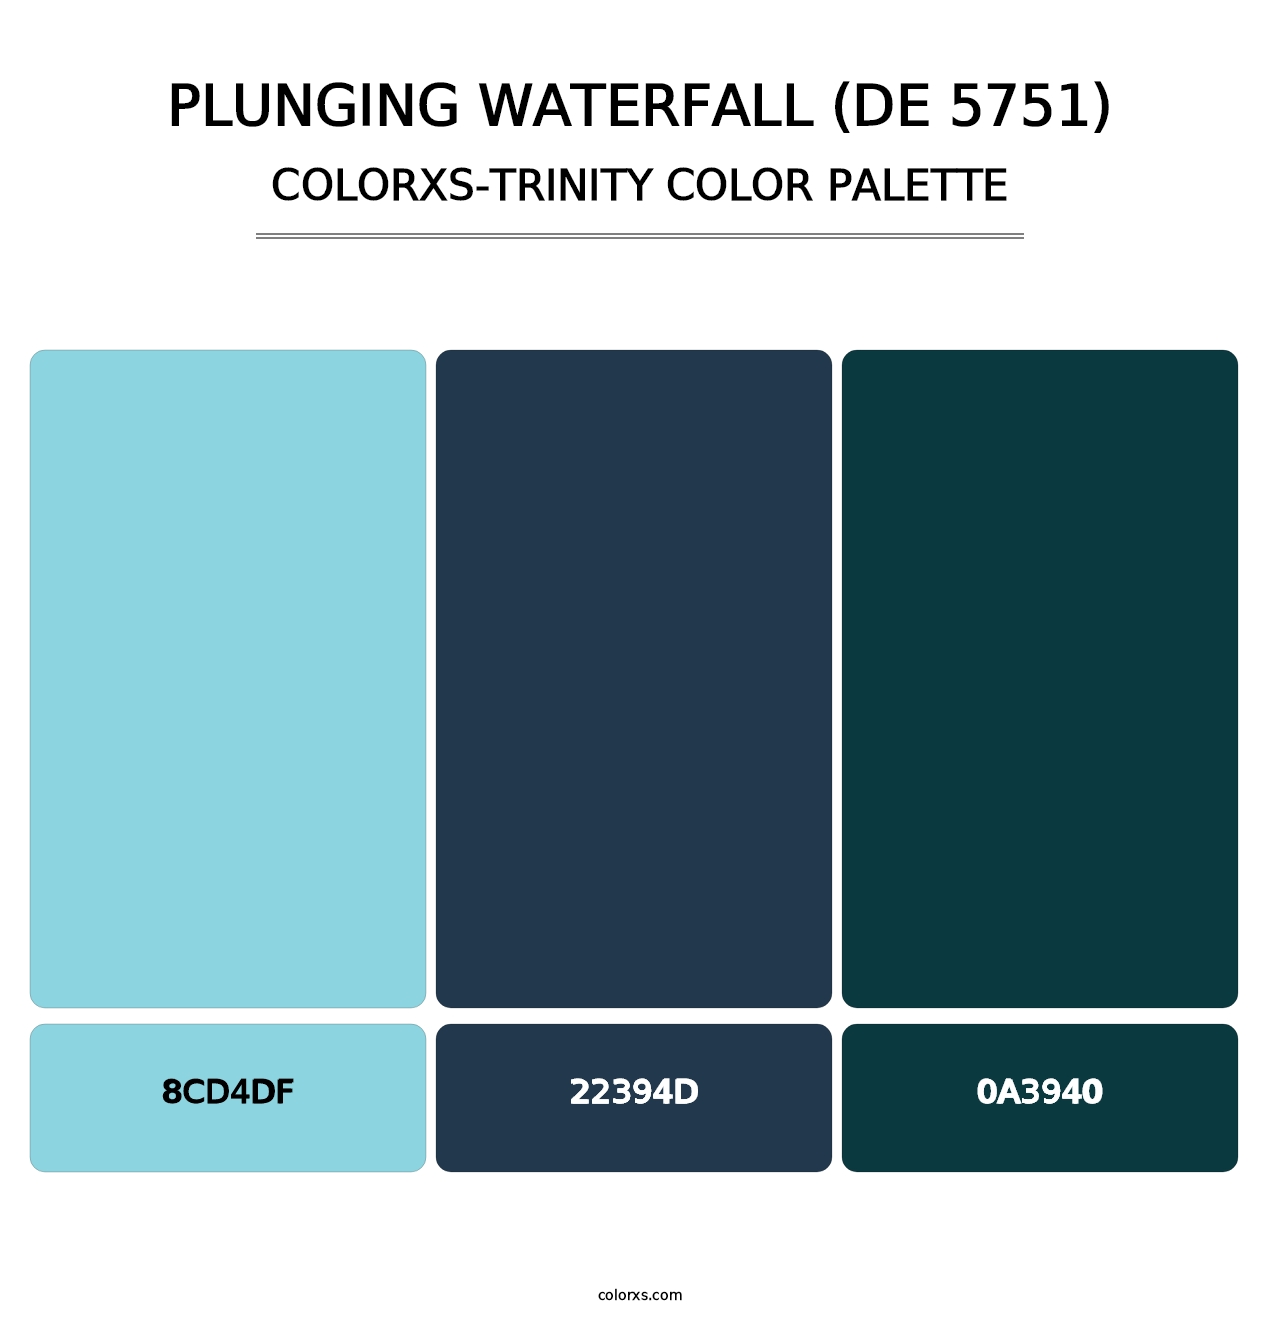 Plunging Waterfall (DE 5751) - Colorxs Trinity Palette